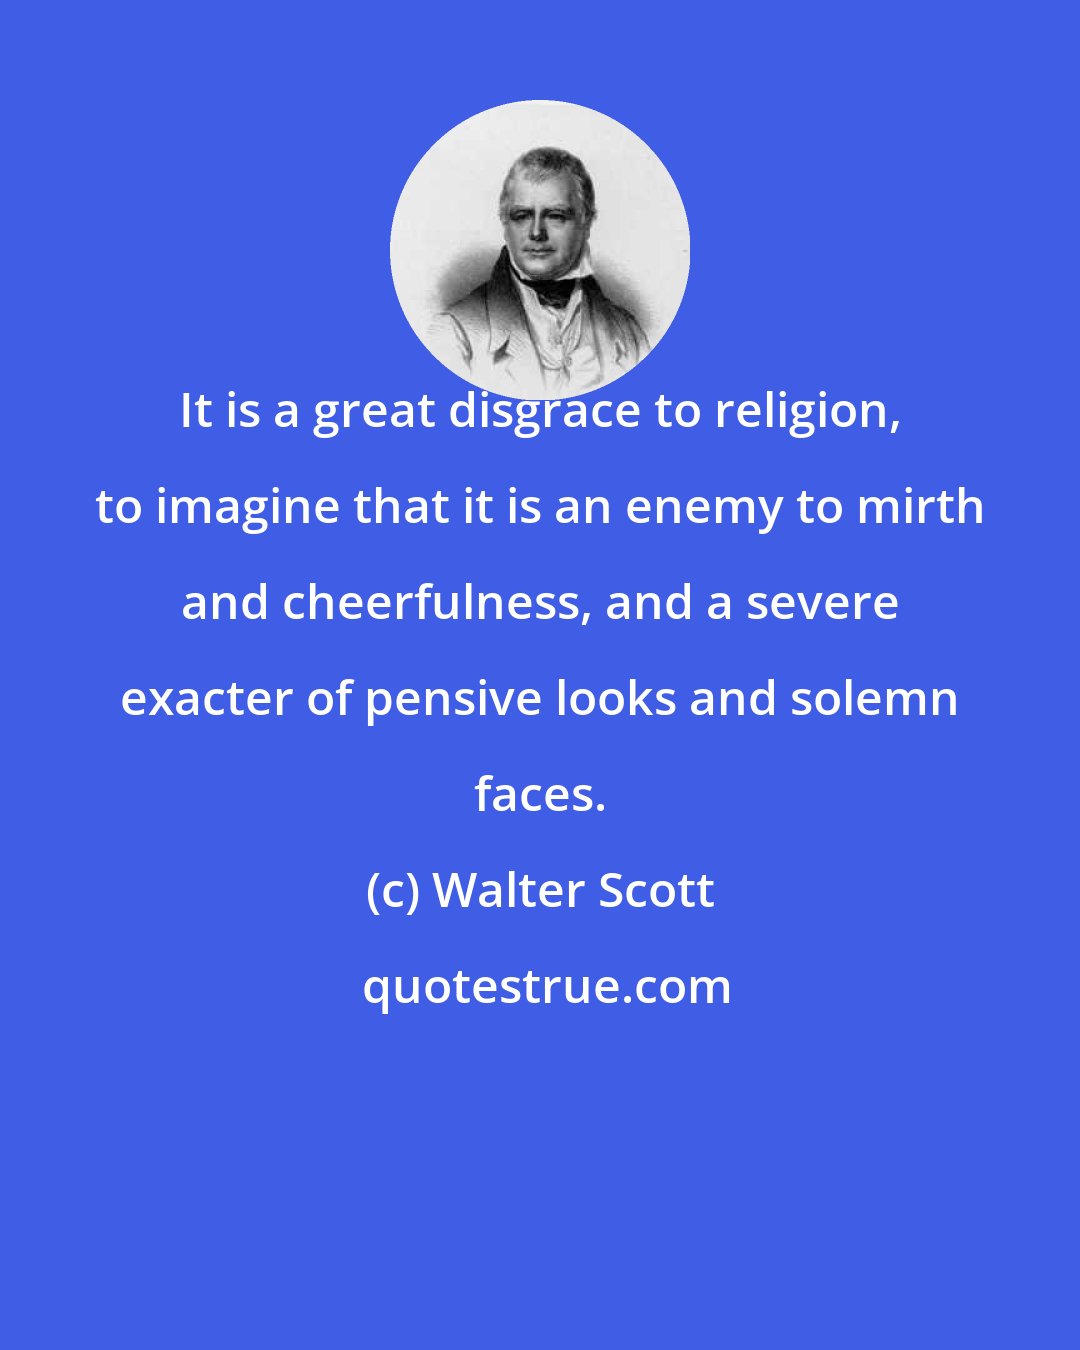 Walter Scott: It is a great disgrace to religion, to imagine that it is an enemy to mirth and cheerfulness, and a severe exacter of pensive looks and solemn faces.